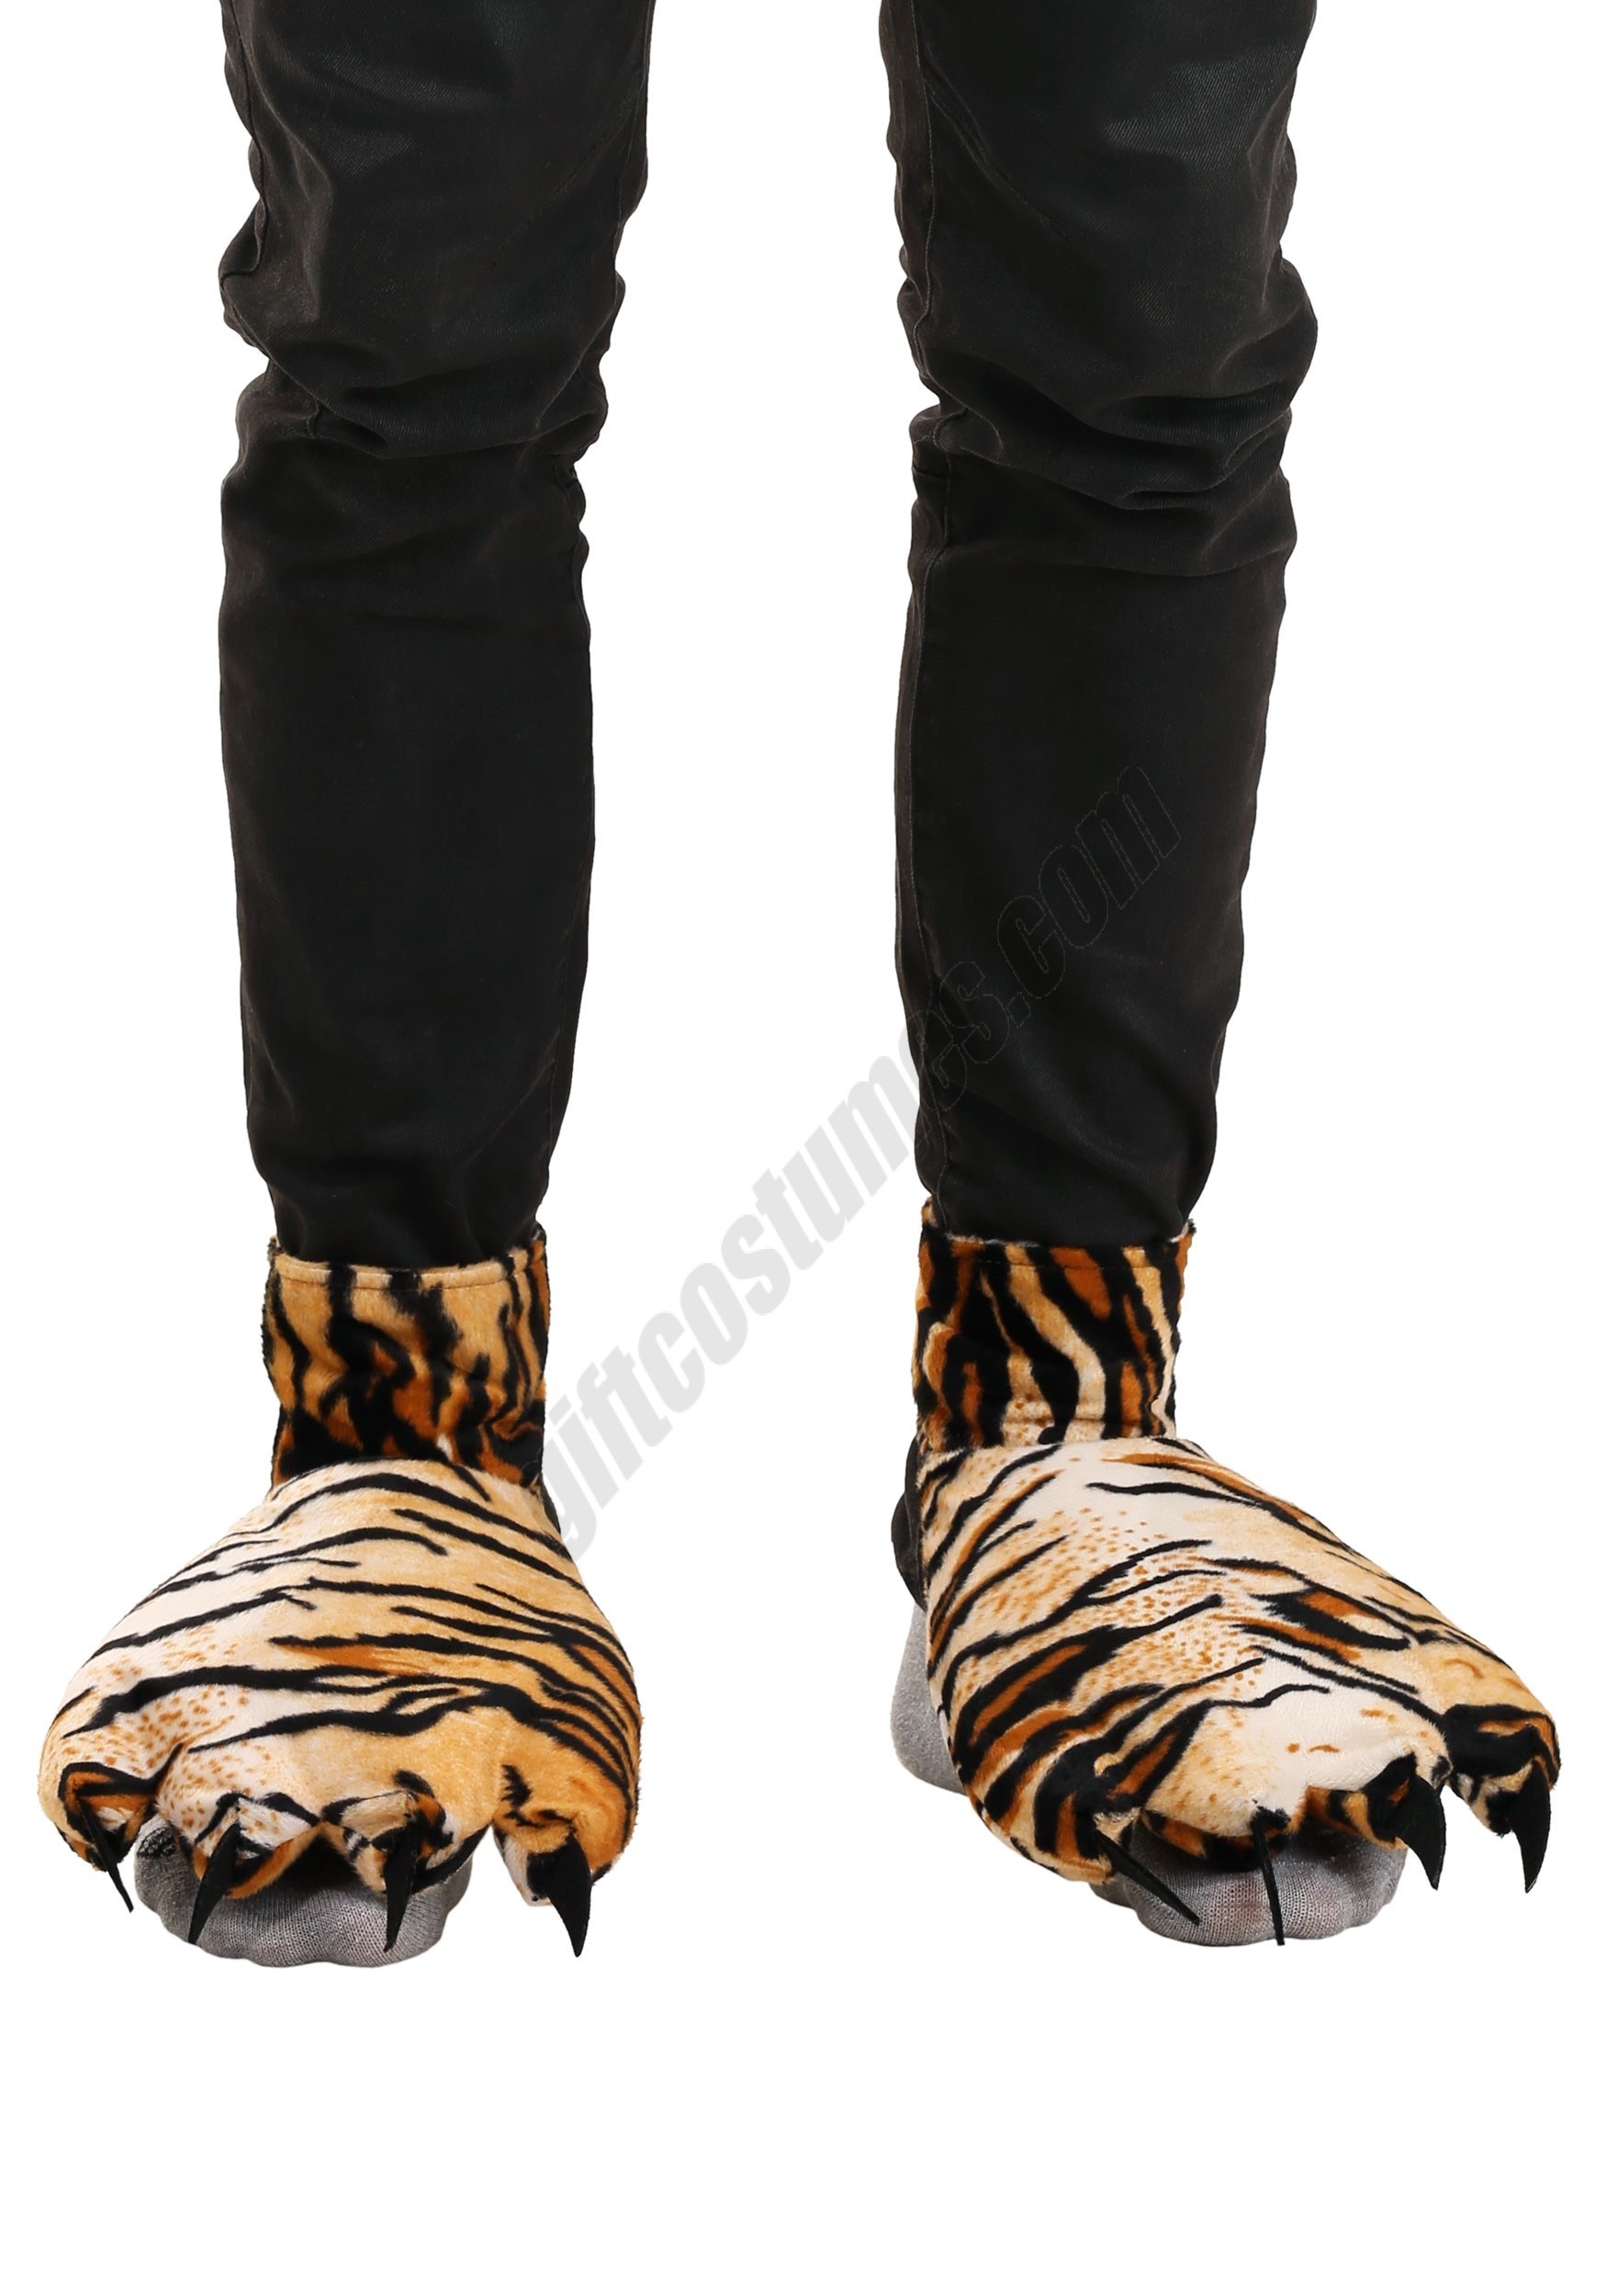 Tiger Shoe Covers Promotions - Tiger Shoe Covers Promotions